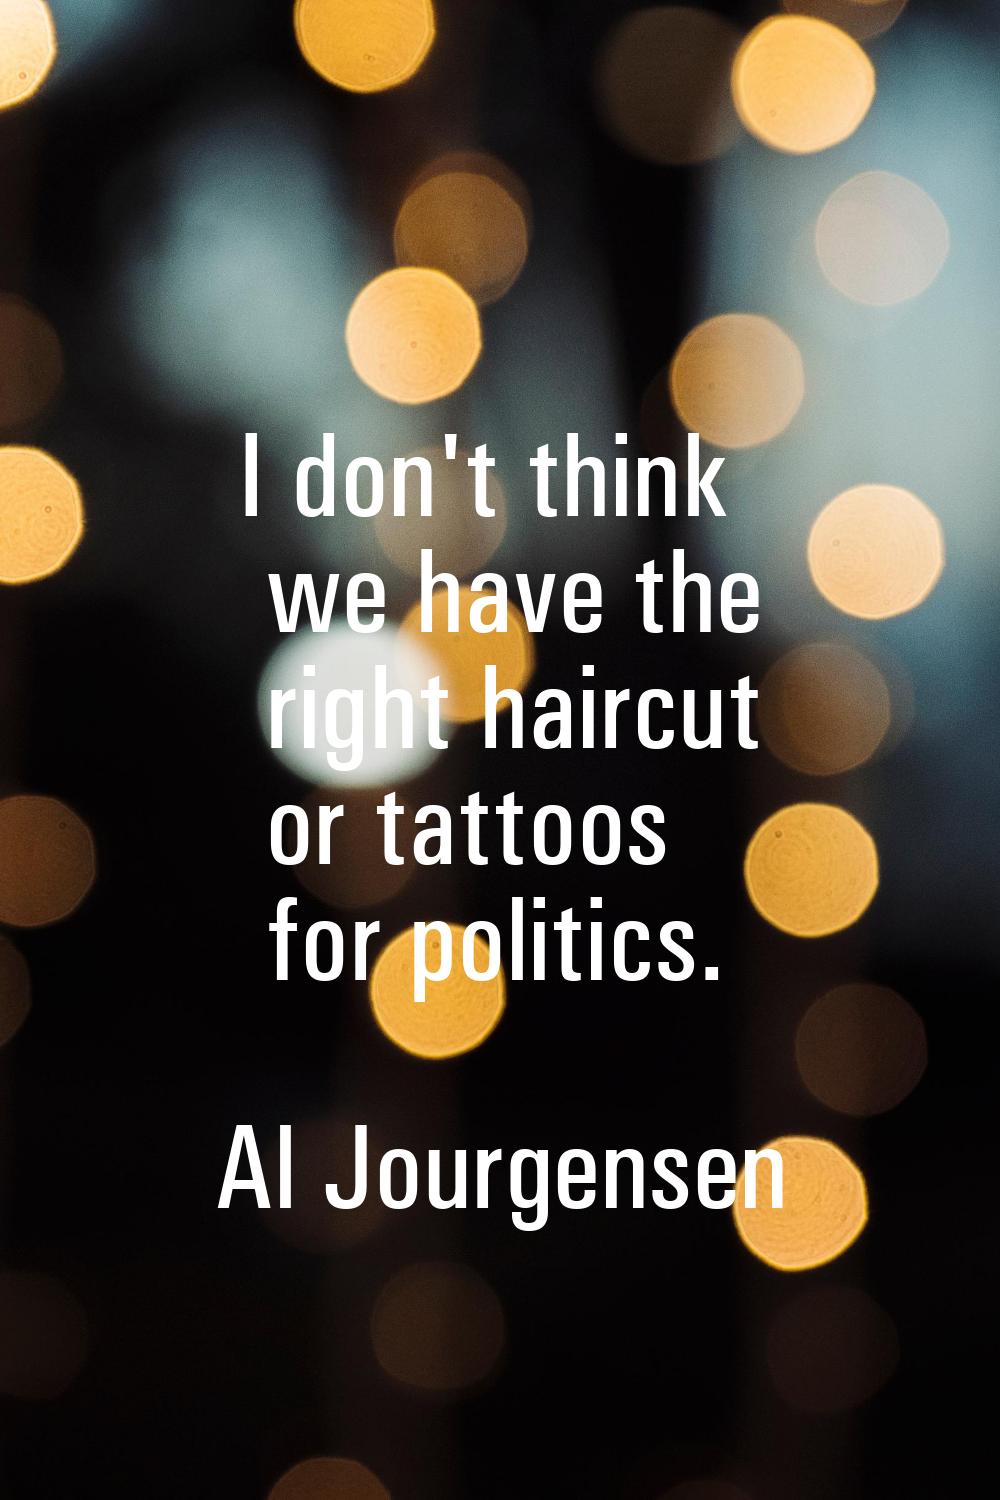 I don't think we have the right haircut or tattoos for politics.